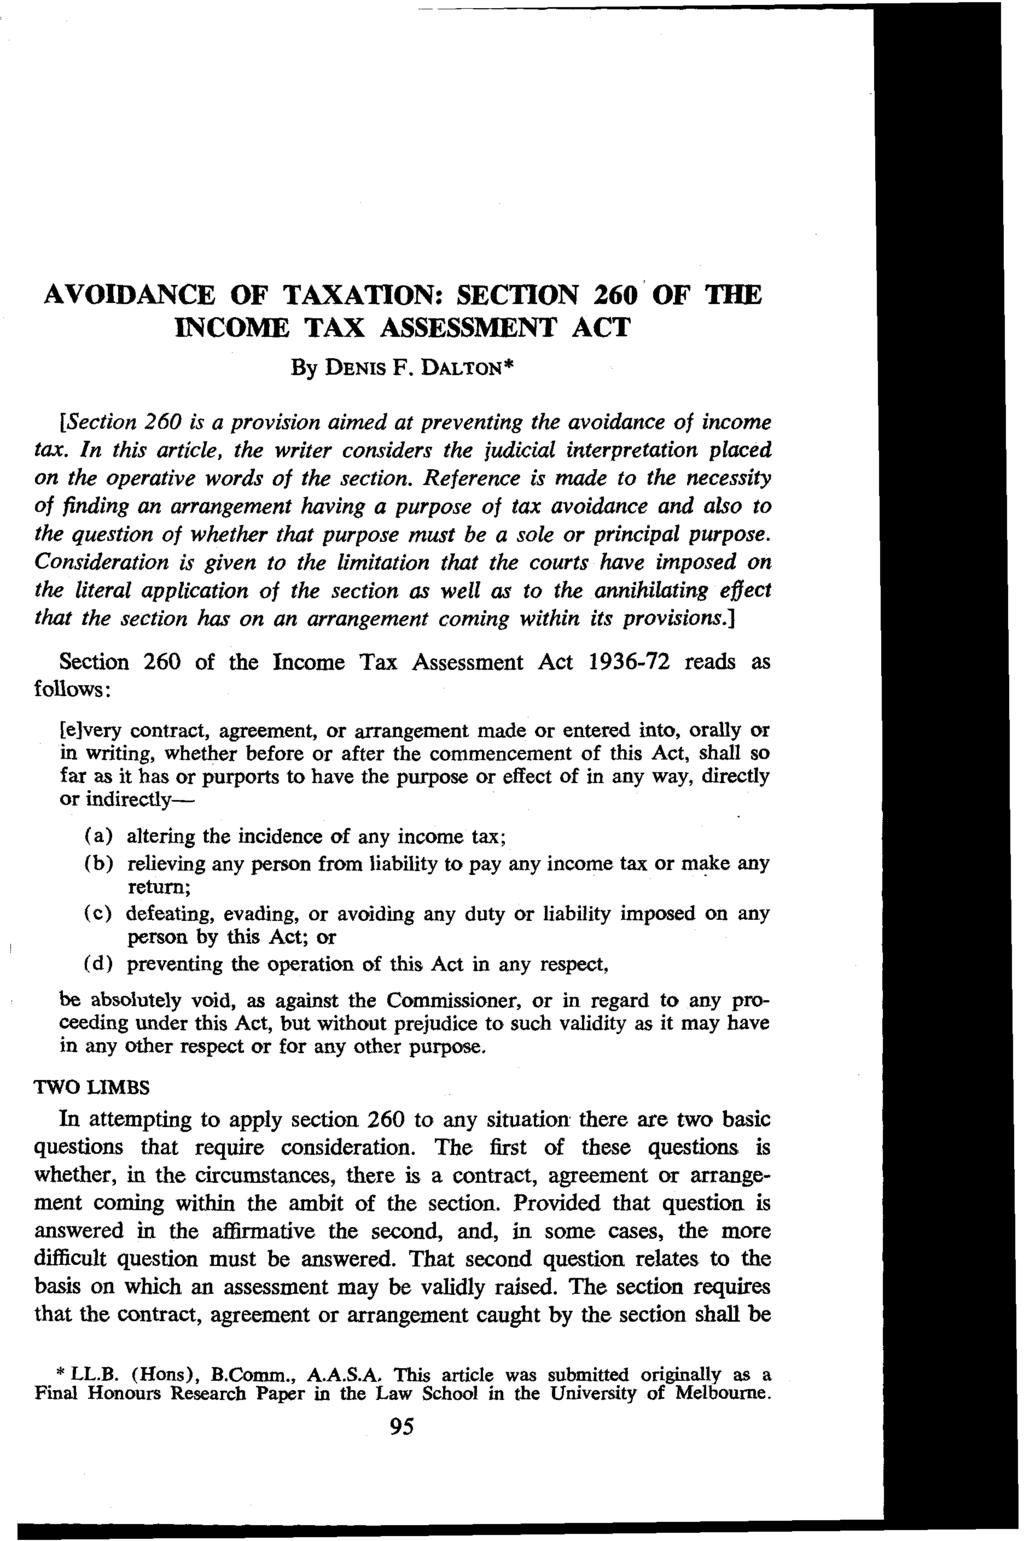 AVOIDANCE OF TAXATION: SECTION 260 OF THE INCOME TAX ASSESSMENT ACT By DENIS F. DALTON* [Section 260 is a provision aimed at preventing the avoidance of income tax.